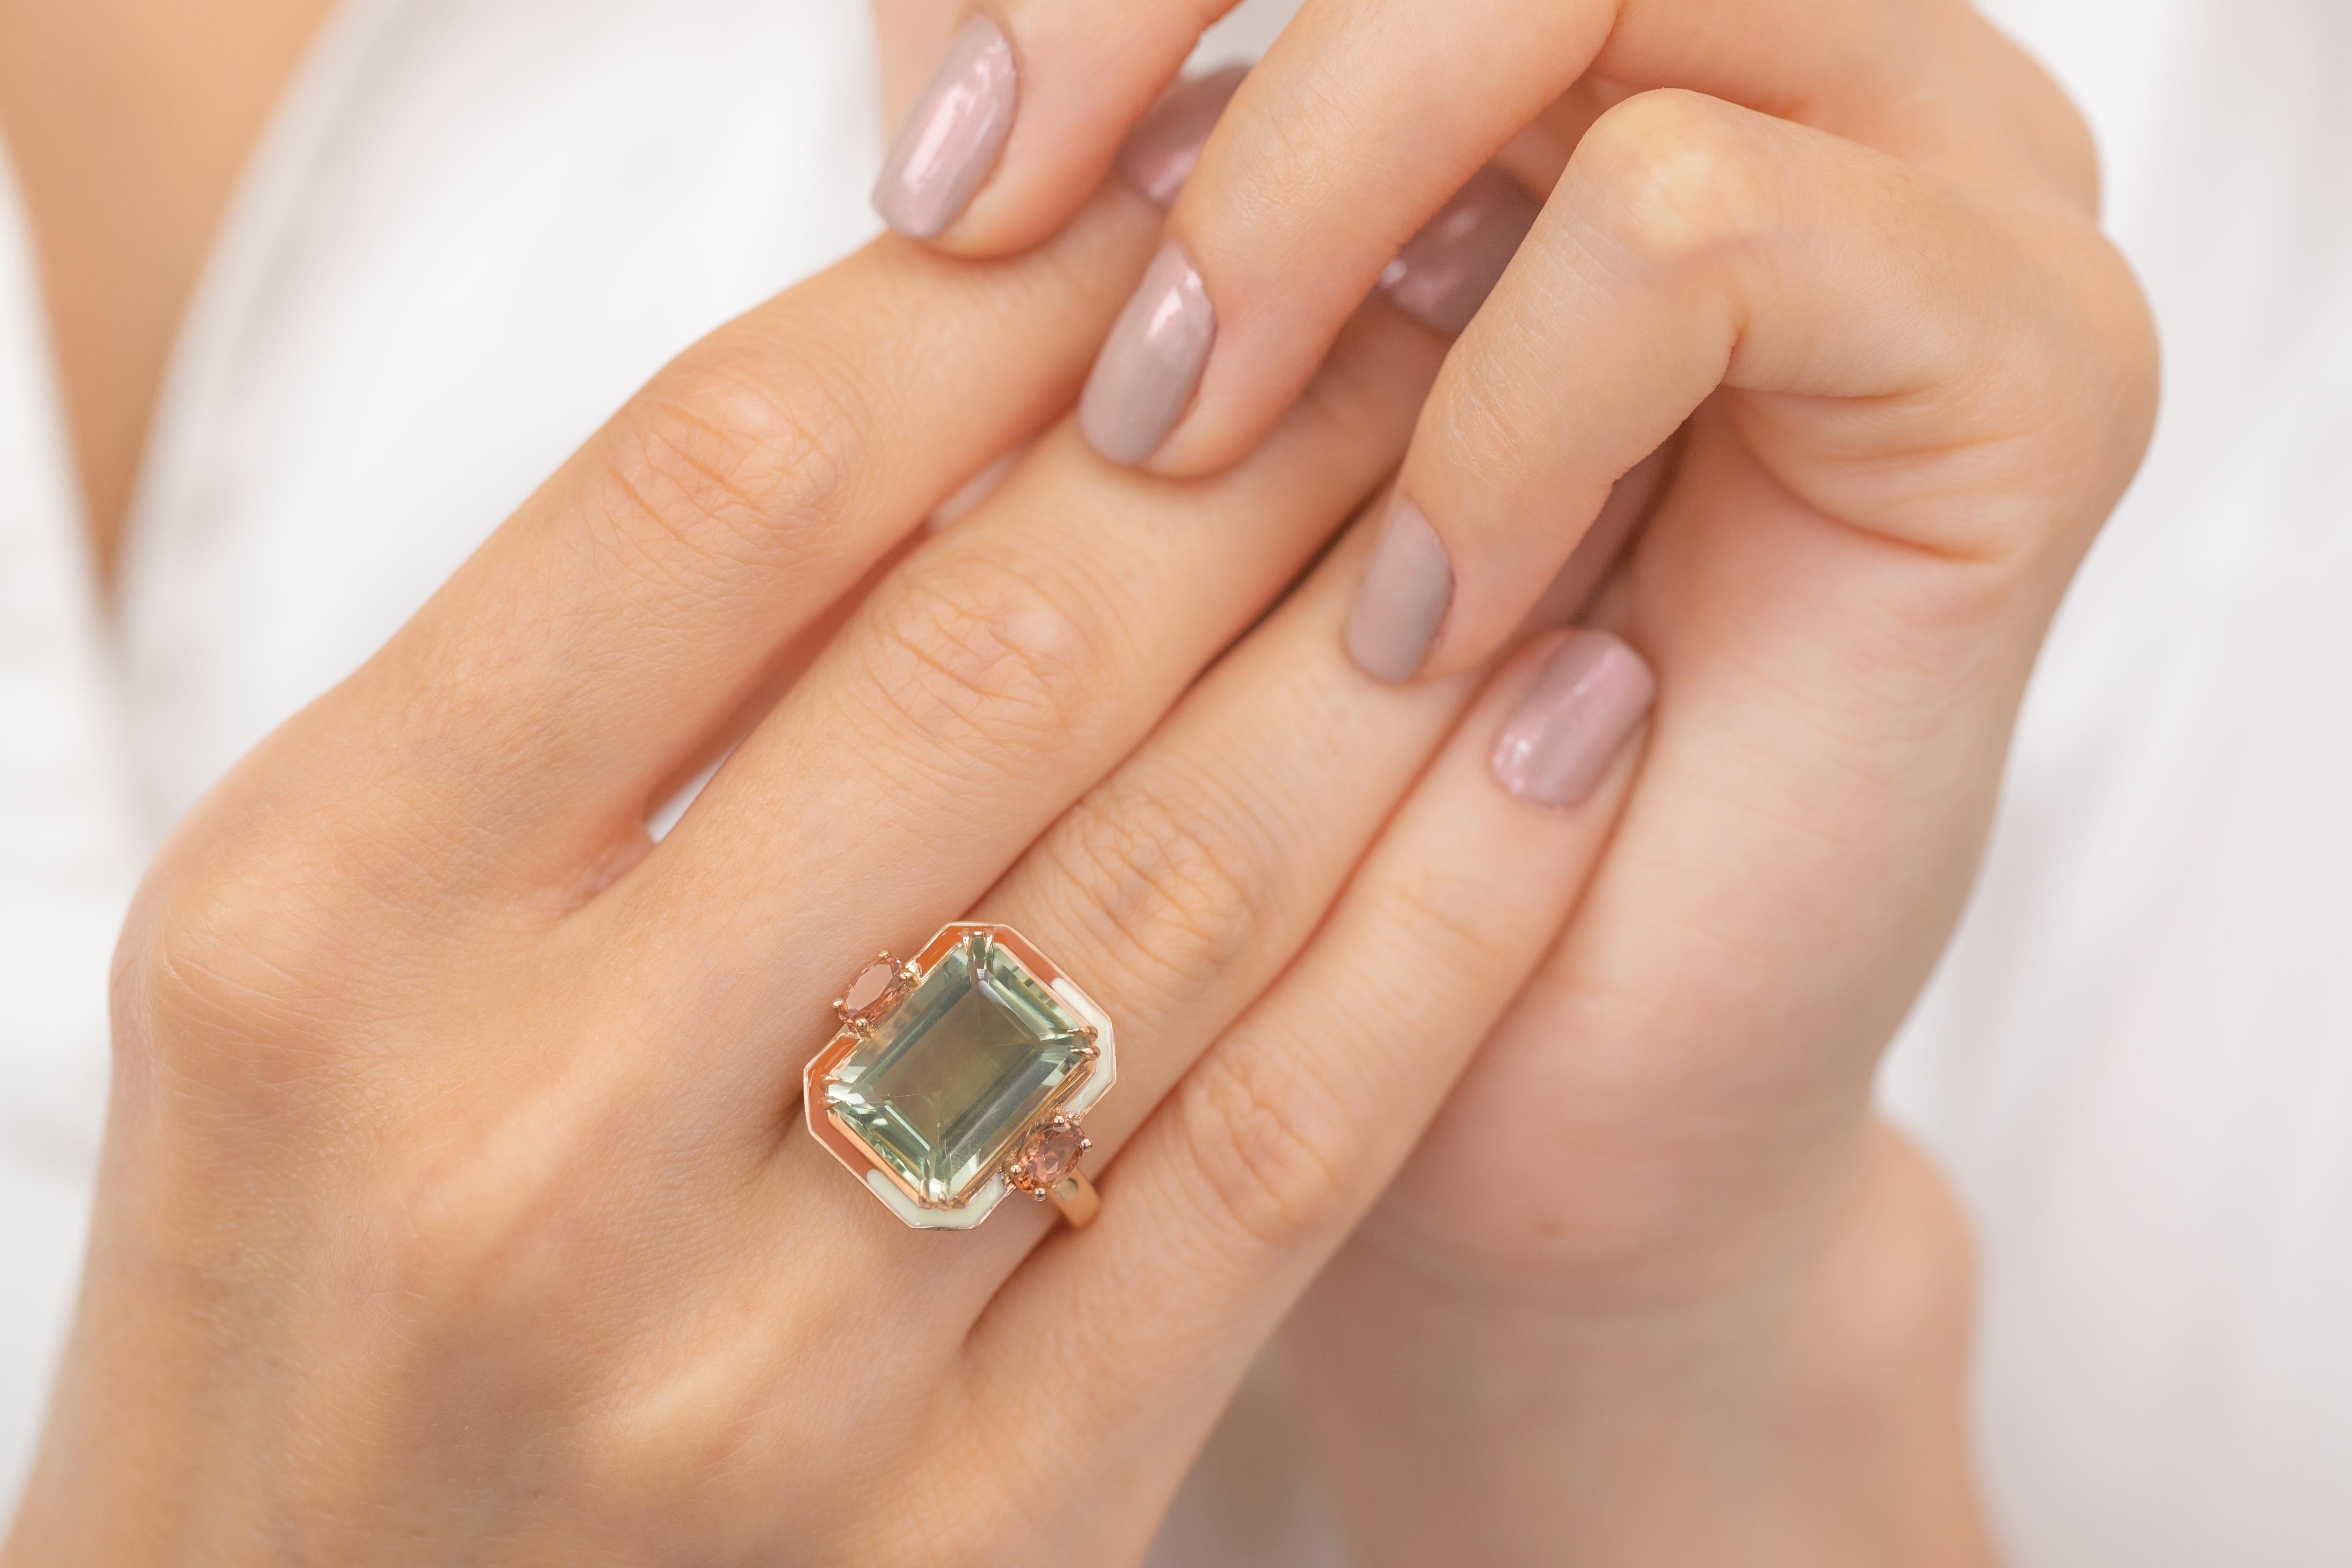 For Sale:  Artdeco Style Ring, 14k Solid Gold, Green Amethyst and Pink Tourmaline Stone Ring 11